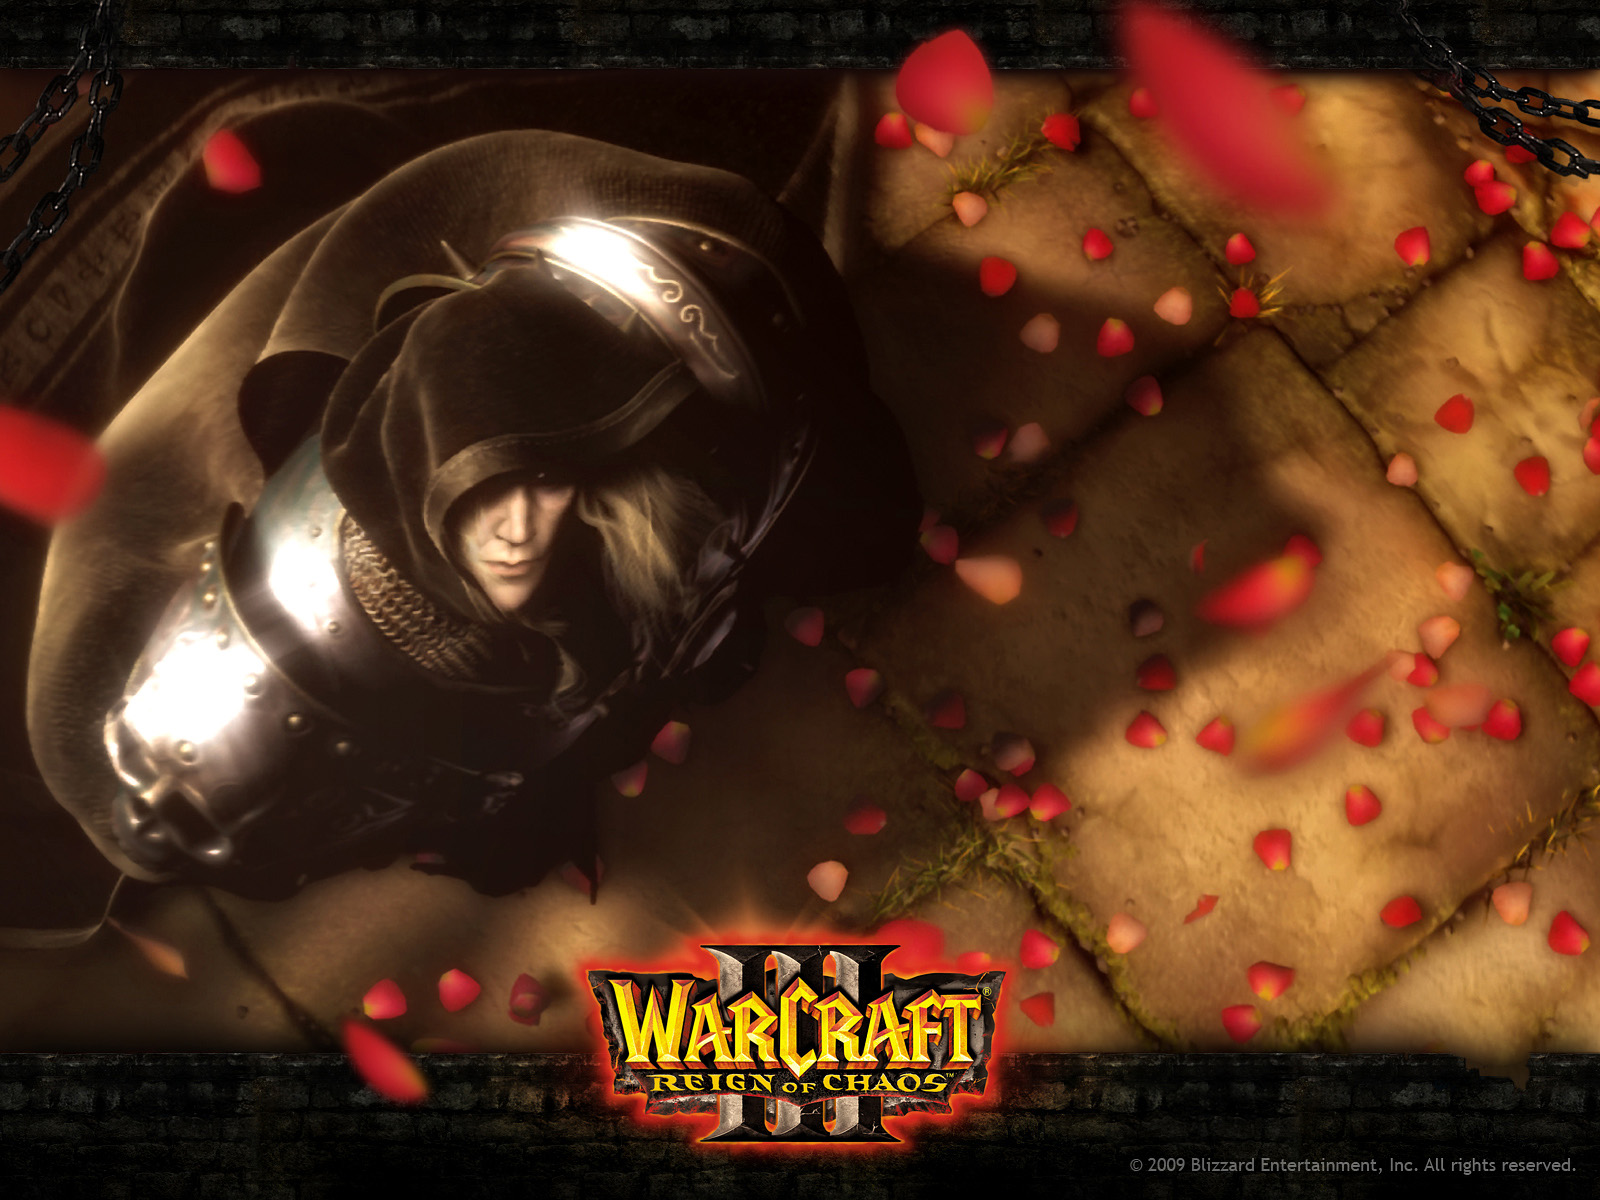 download world of warcraft for mac os x